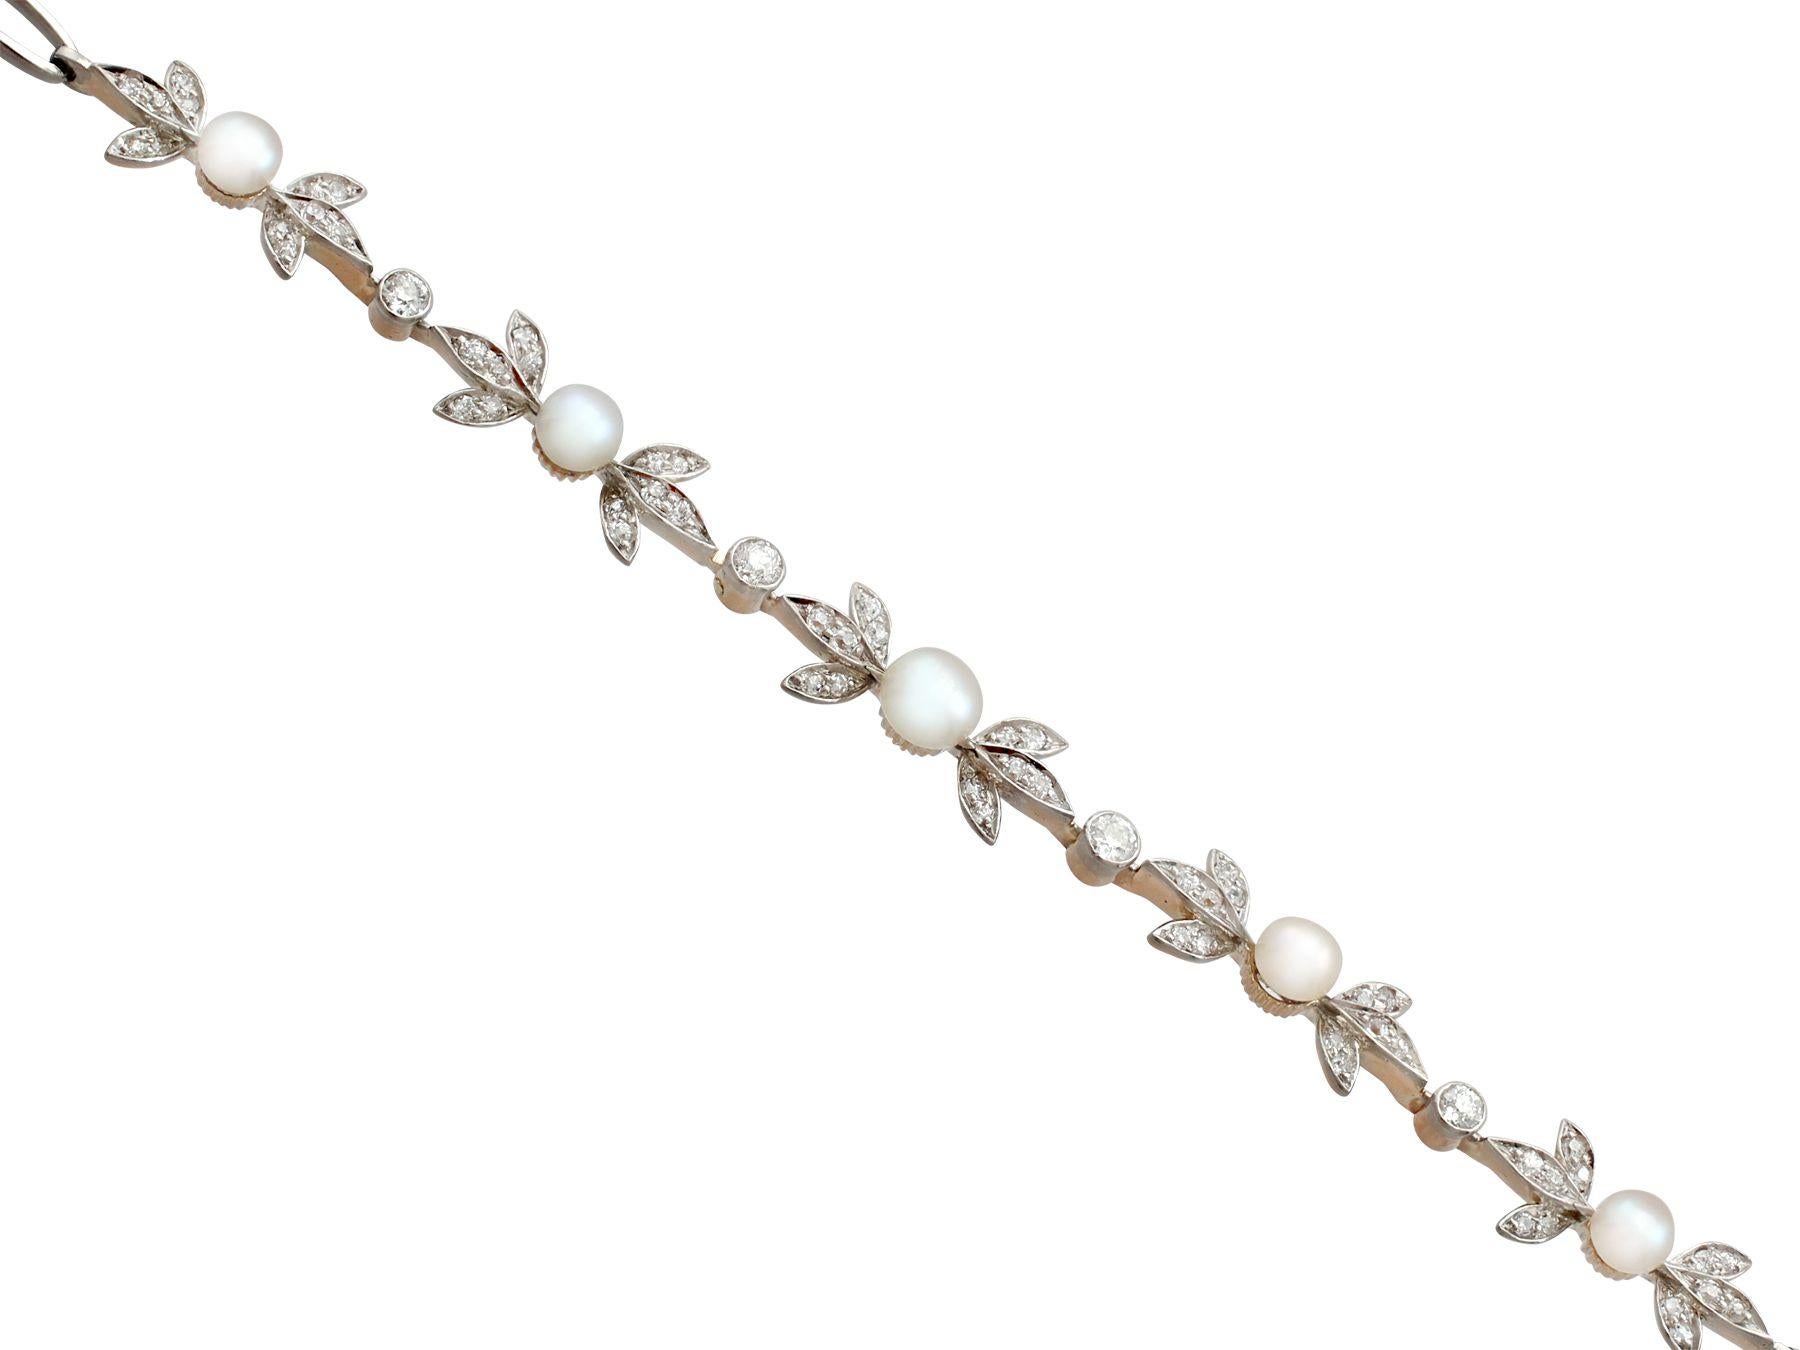 Old European Cut Antique 1.42 Carat Diamond and Natural Pearl Yellow Gold Bracelet, circa 1910 For Sale